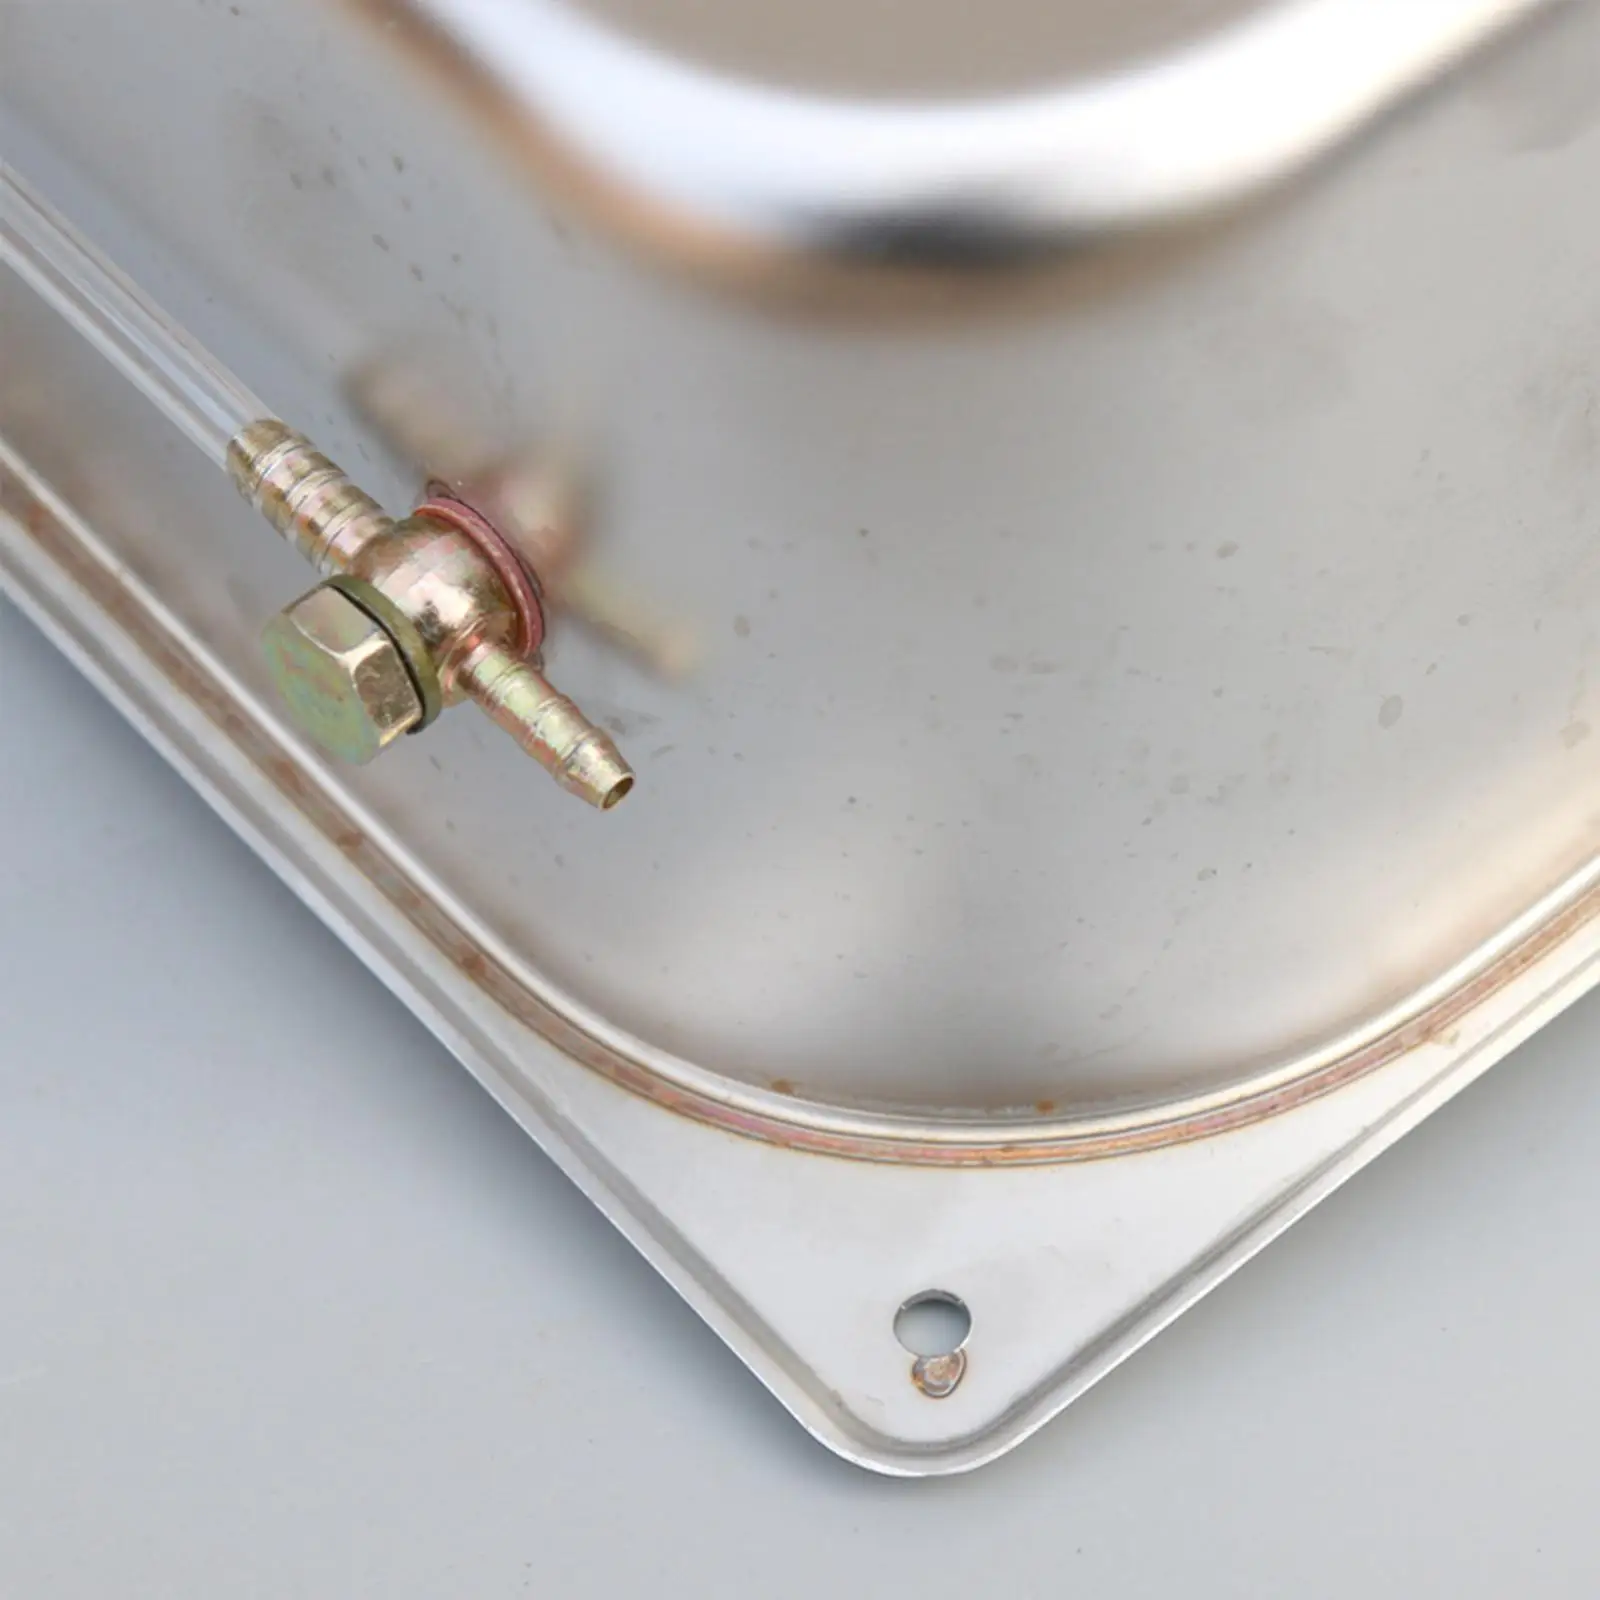 Stainless Tank Backup Petrol Tanks for Most Cars